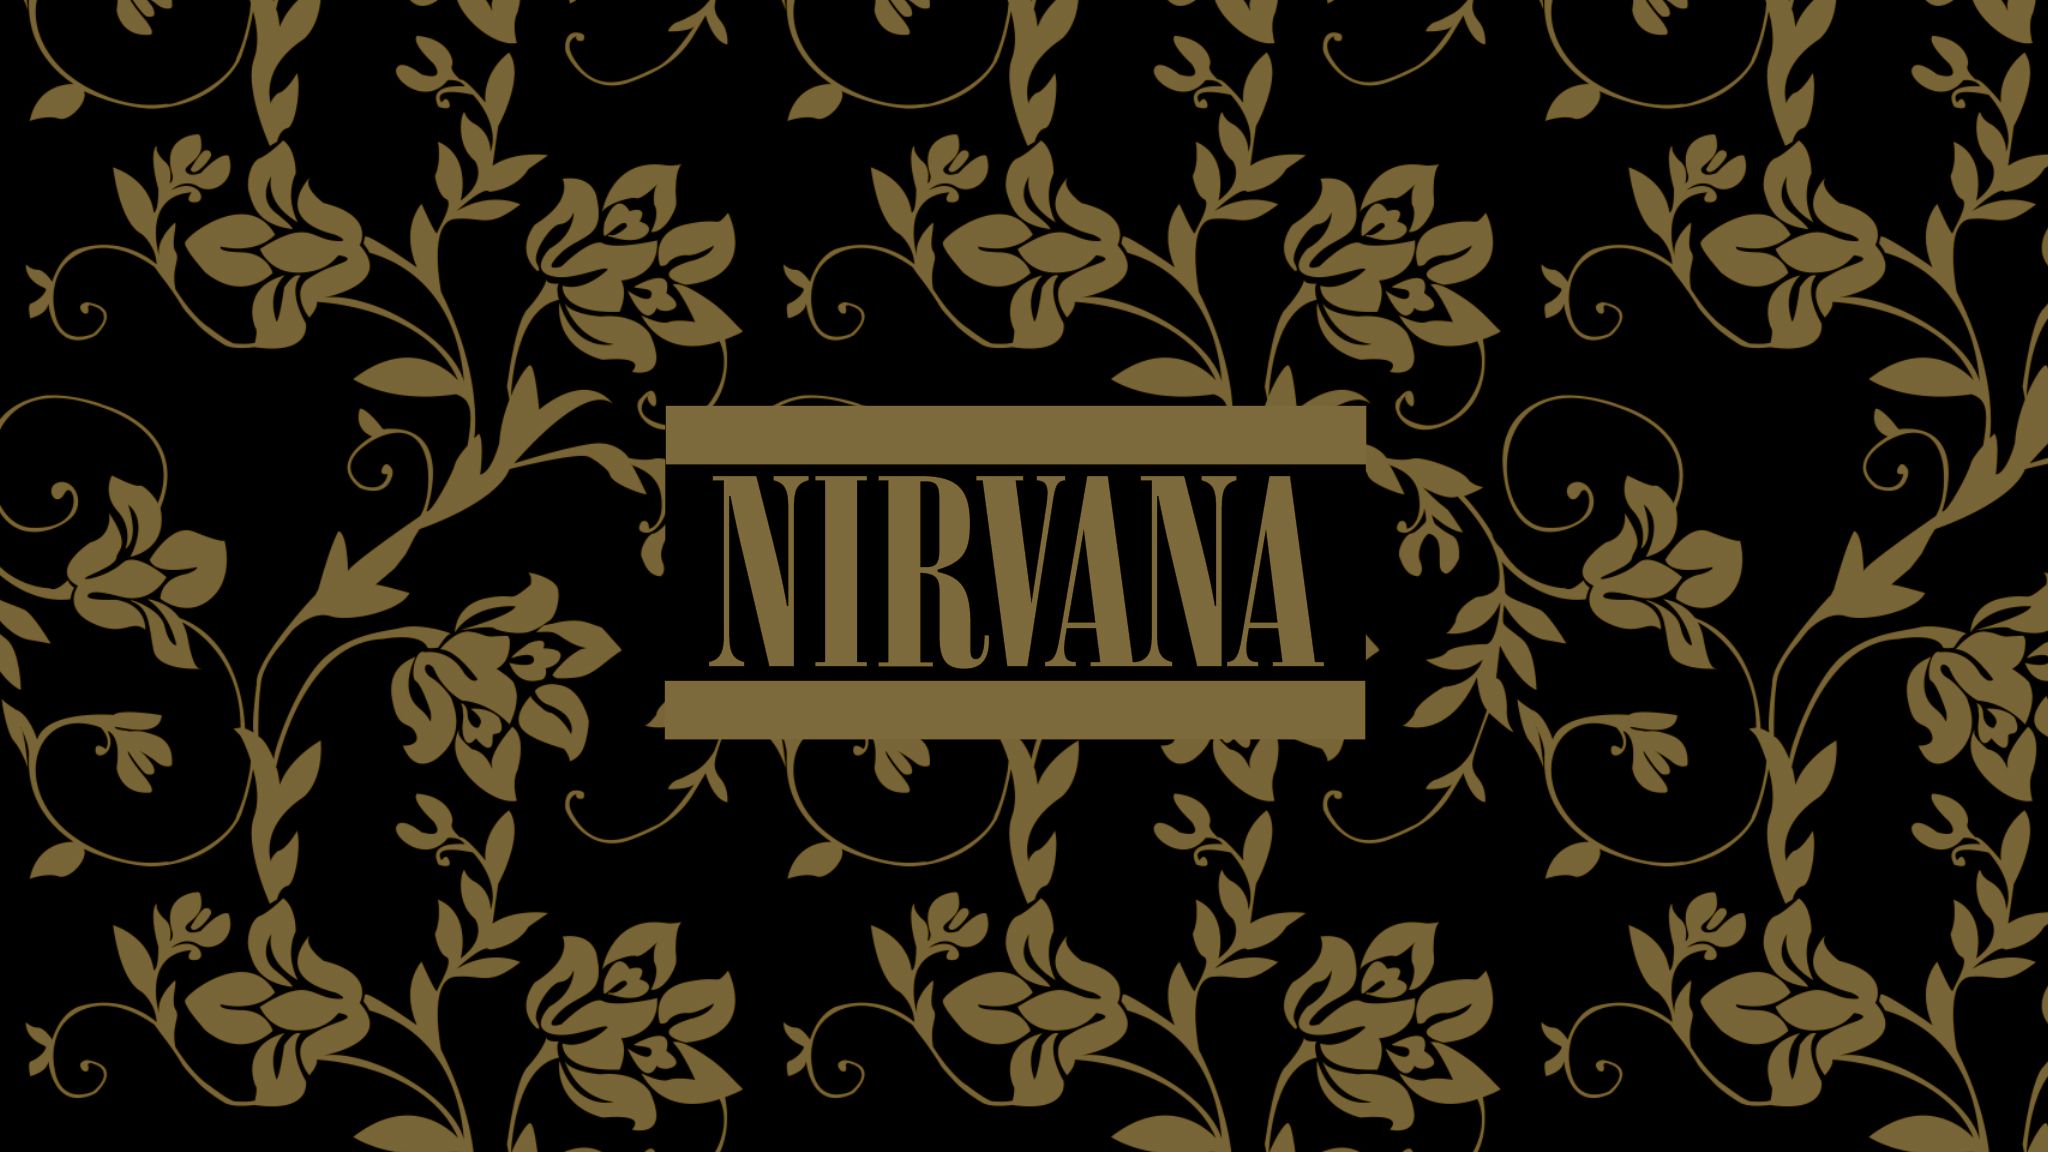 90S Grunge Bands LogoWallpapers